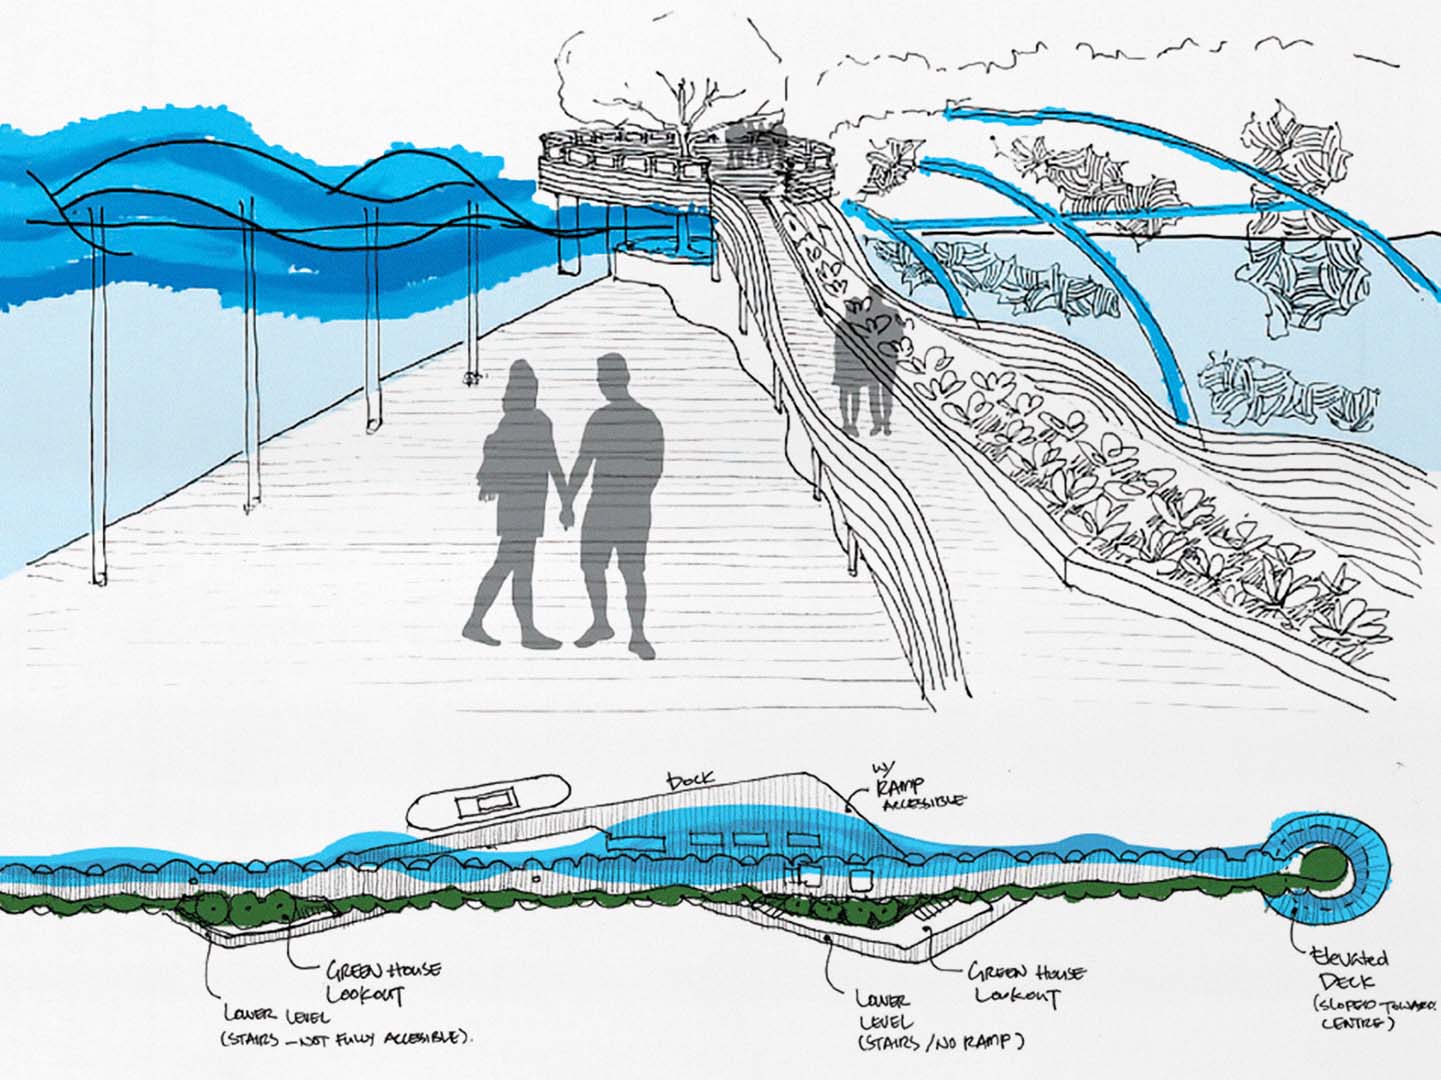 sketch of pier at lakeview village